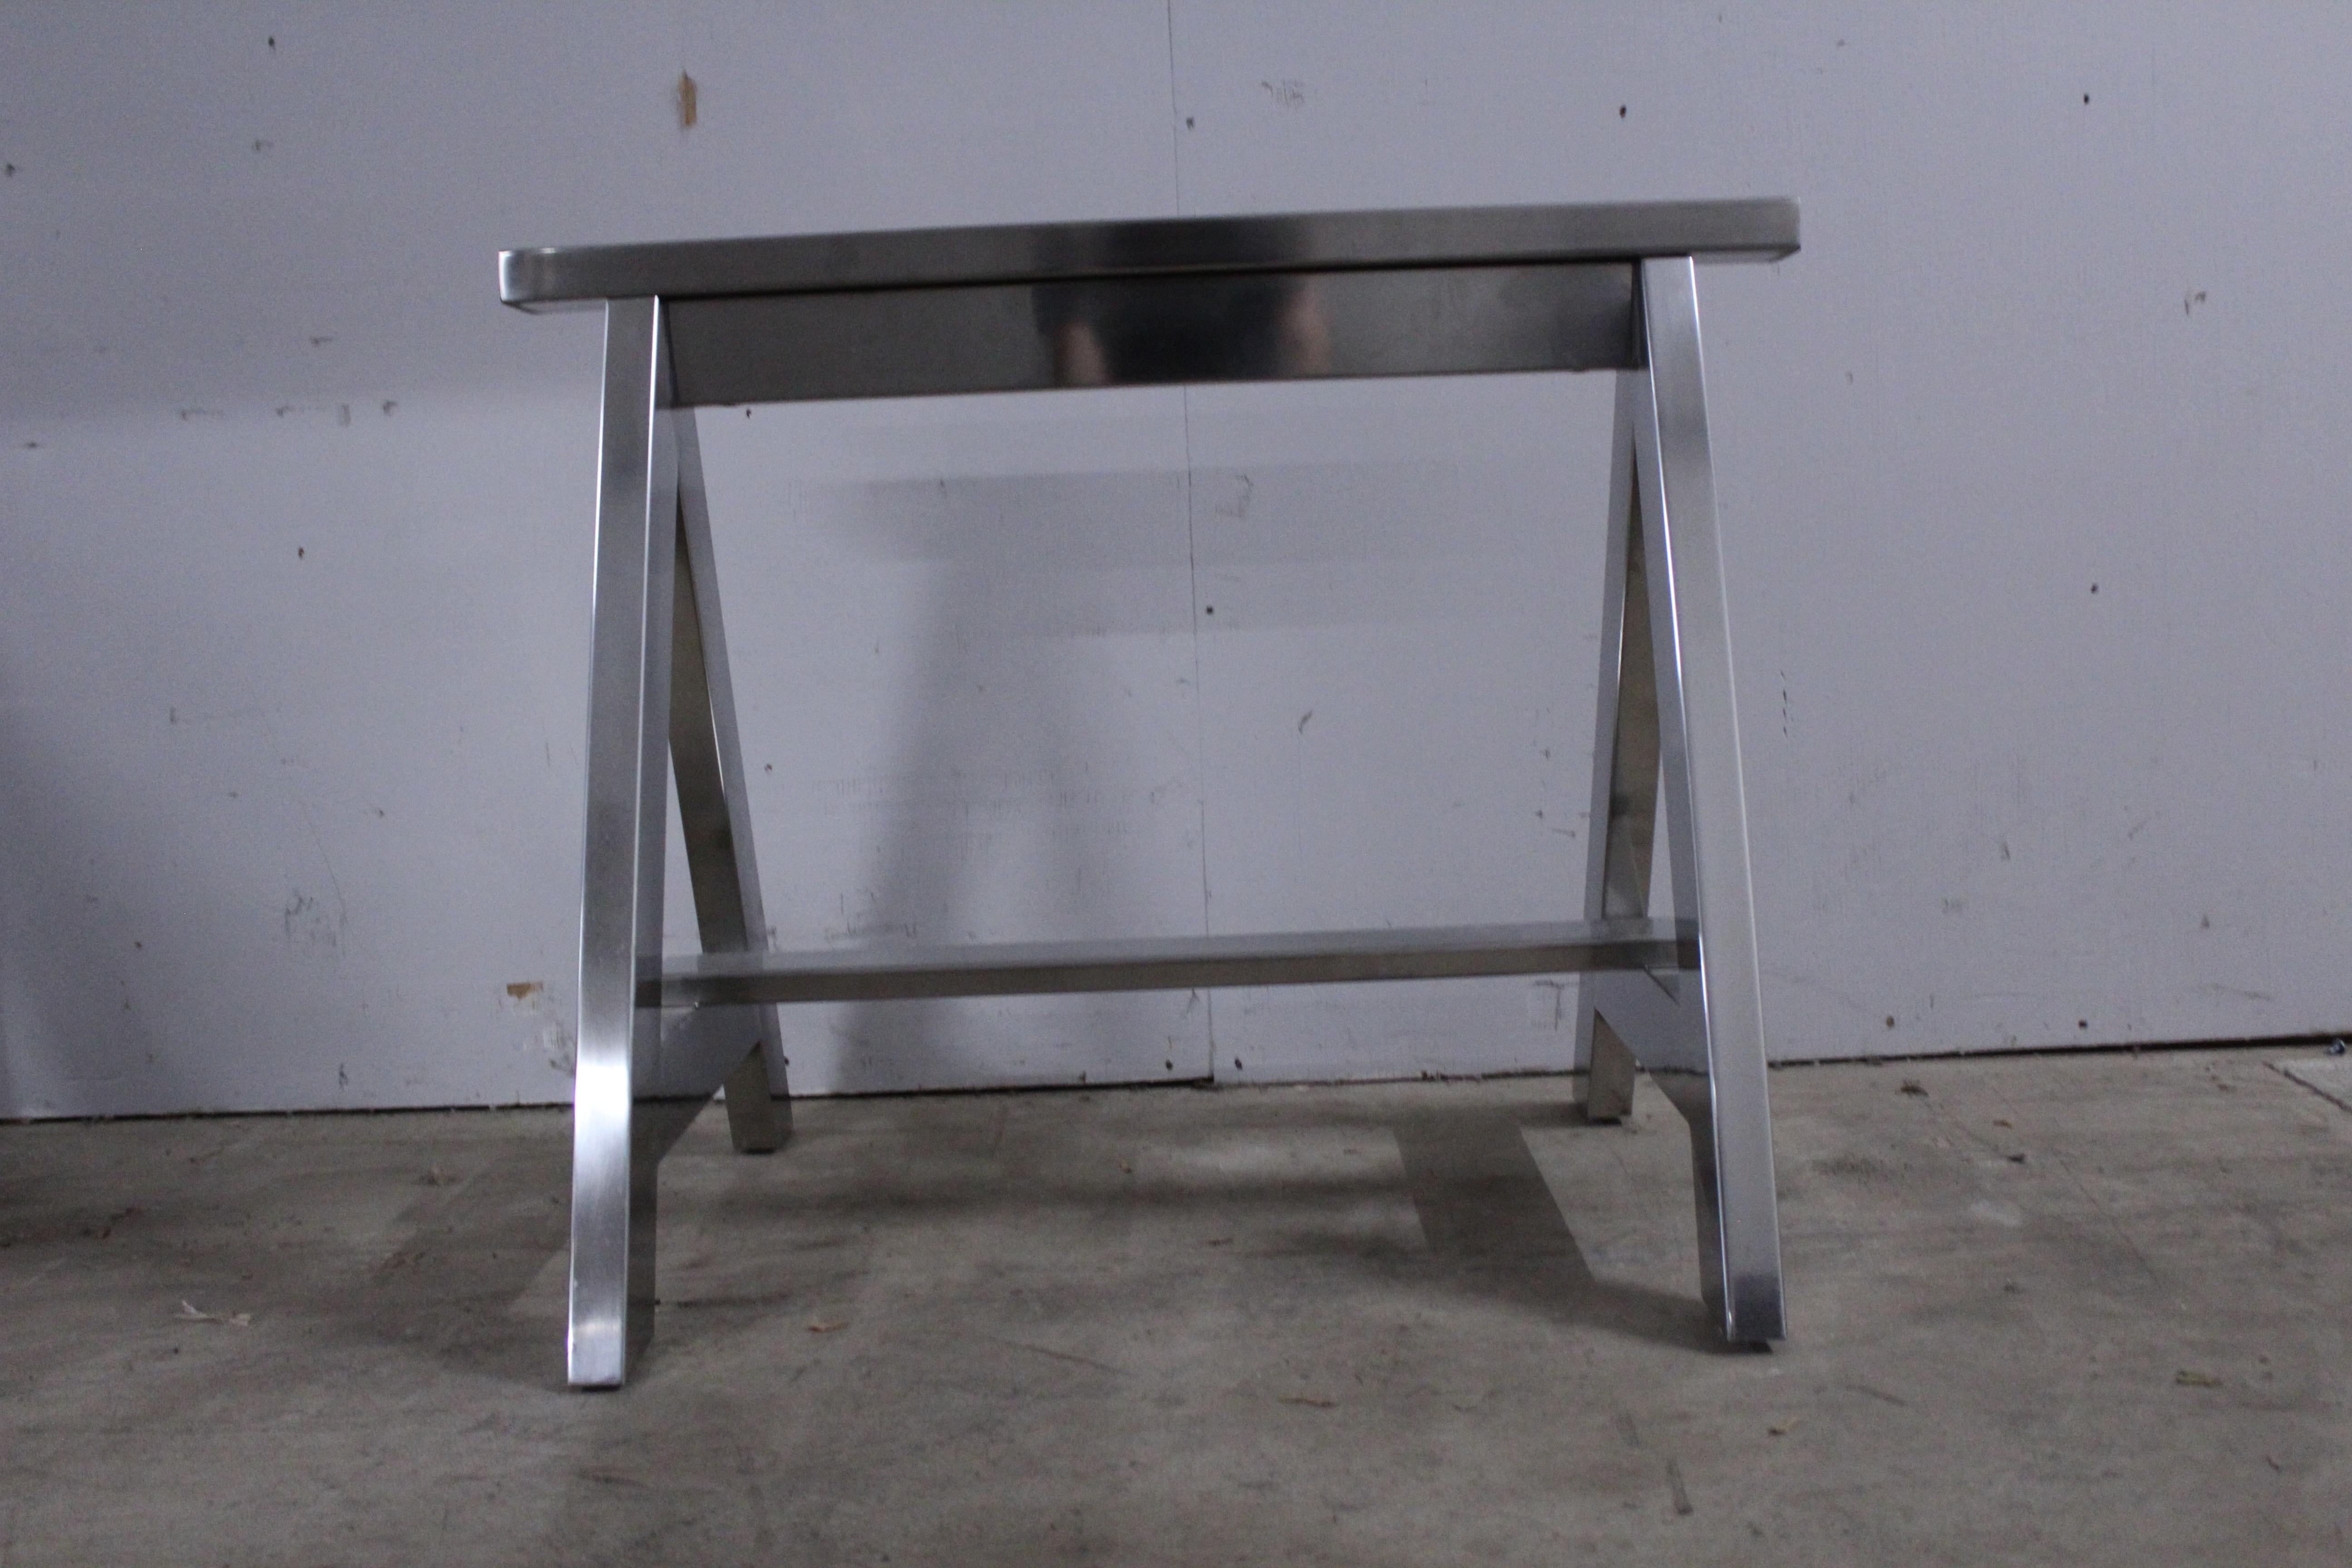 Set of Ralph Lauren Highbridge polished stainless steel sawhorse desk legs in excellent condition. May be used as a desk, dining table, utility table, or small conference table.